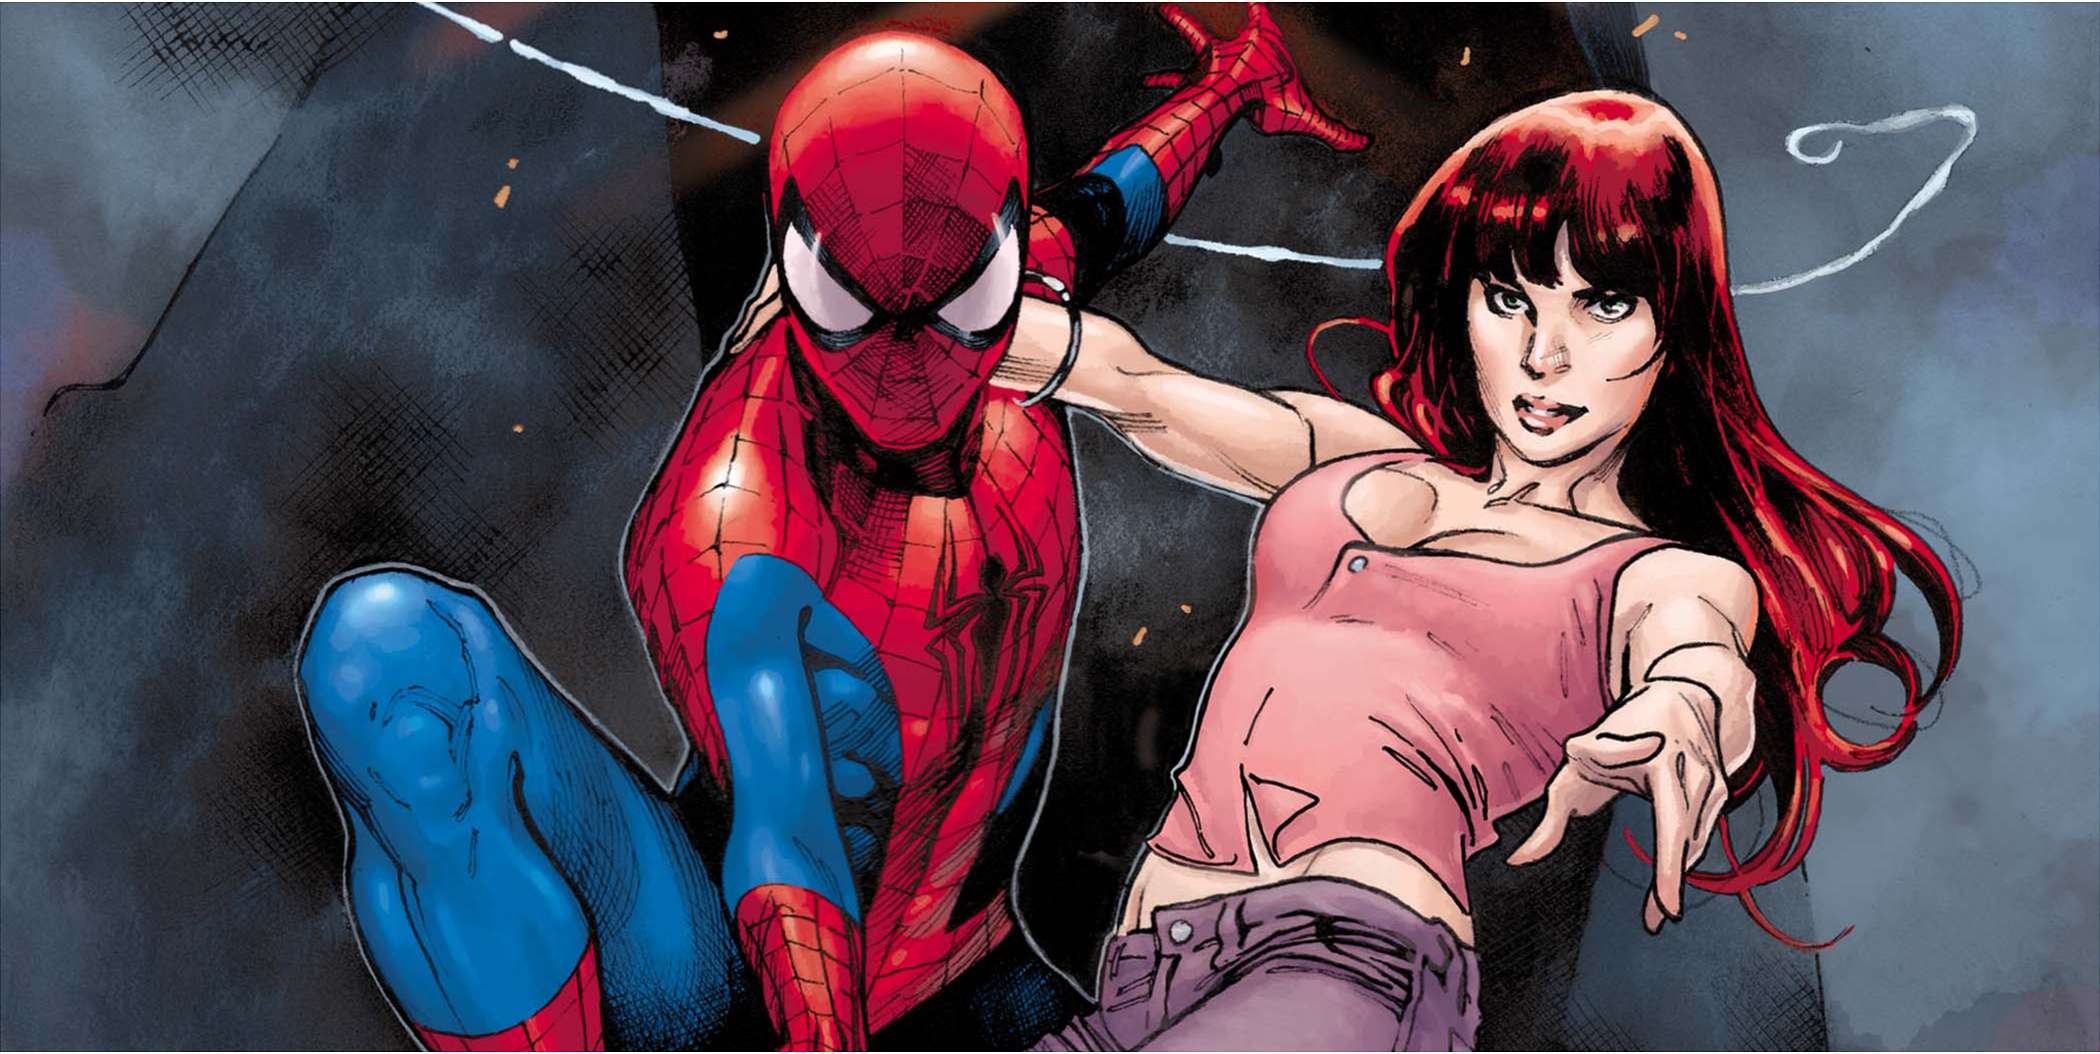 J.J. Abrams & Henry Abrams To Release A Spider-Man Mini-Series This September